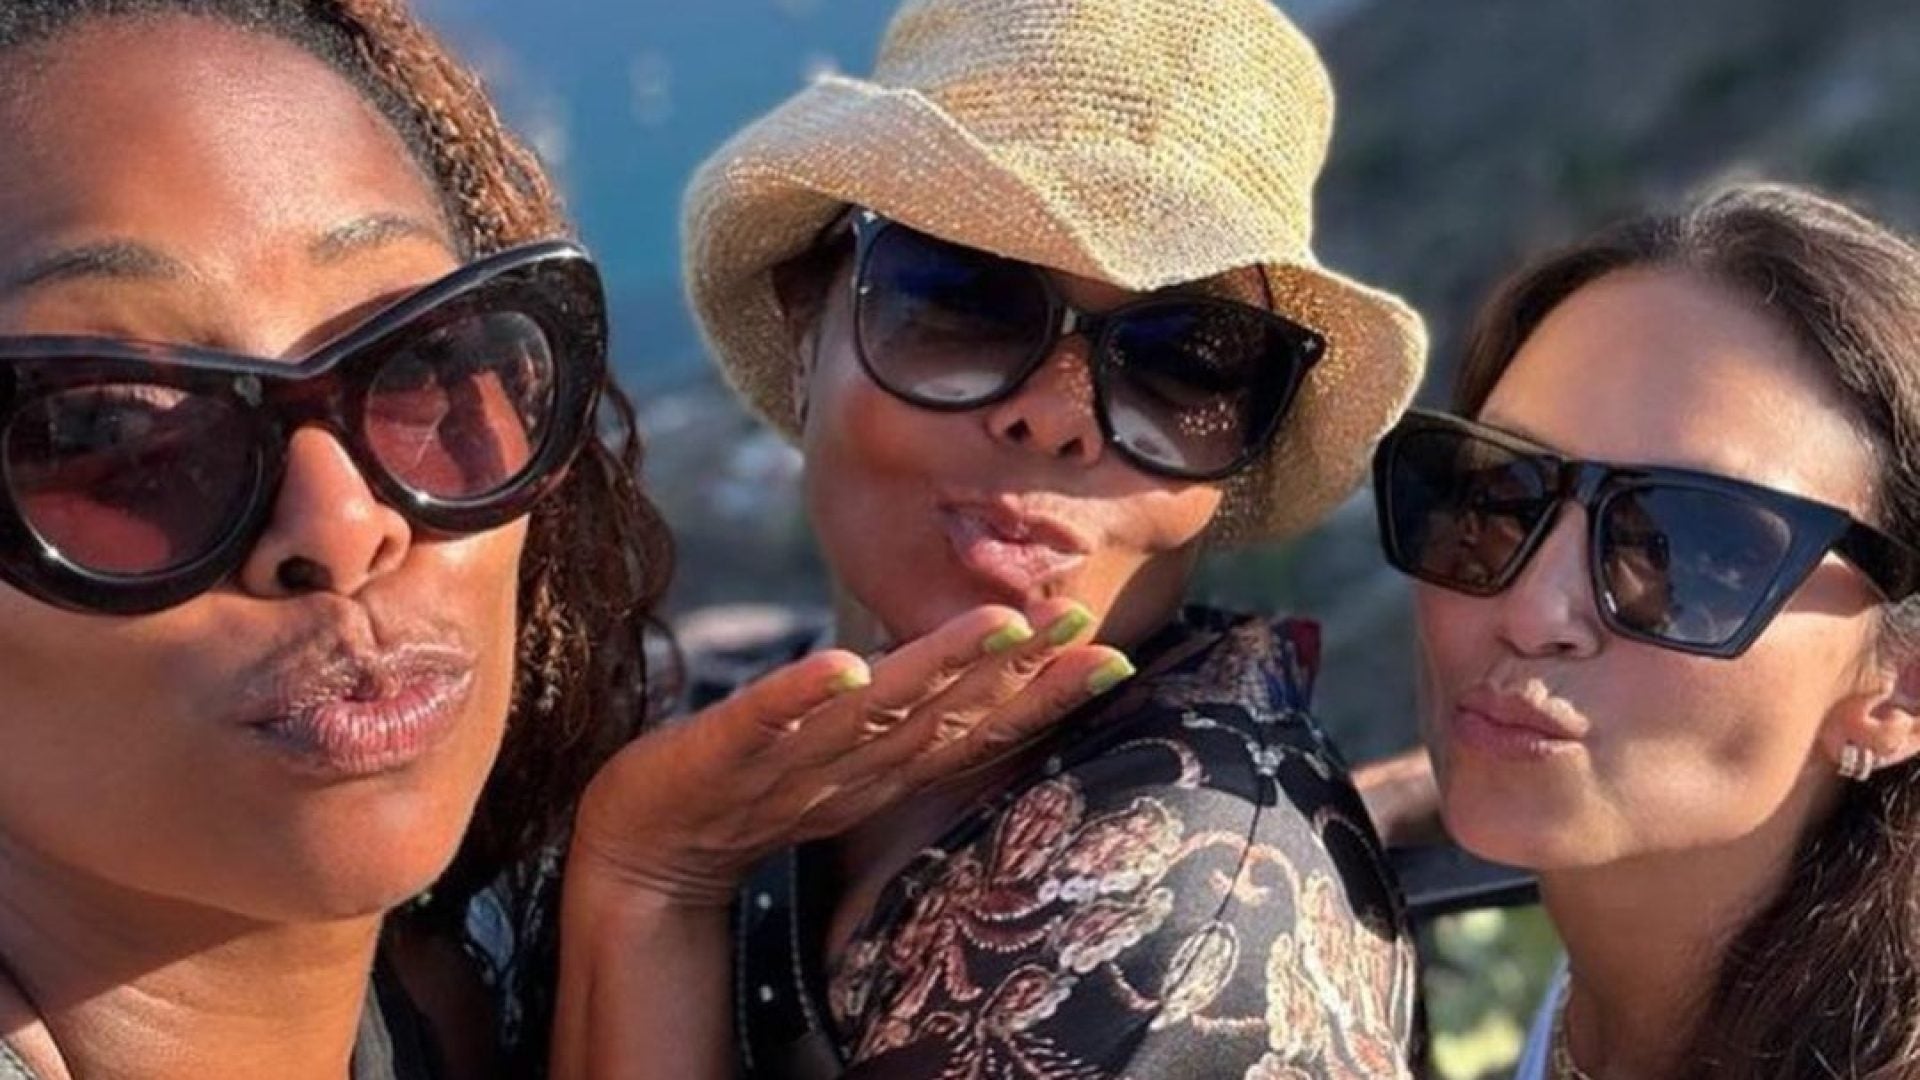 It’s A Girls Trip! Janet Jackson And Tasha Smith Live It Up In Italy